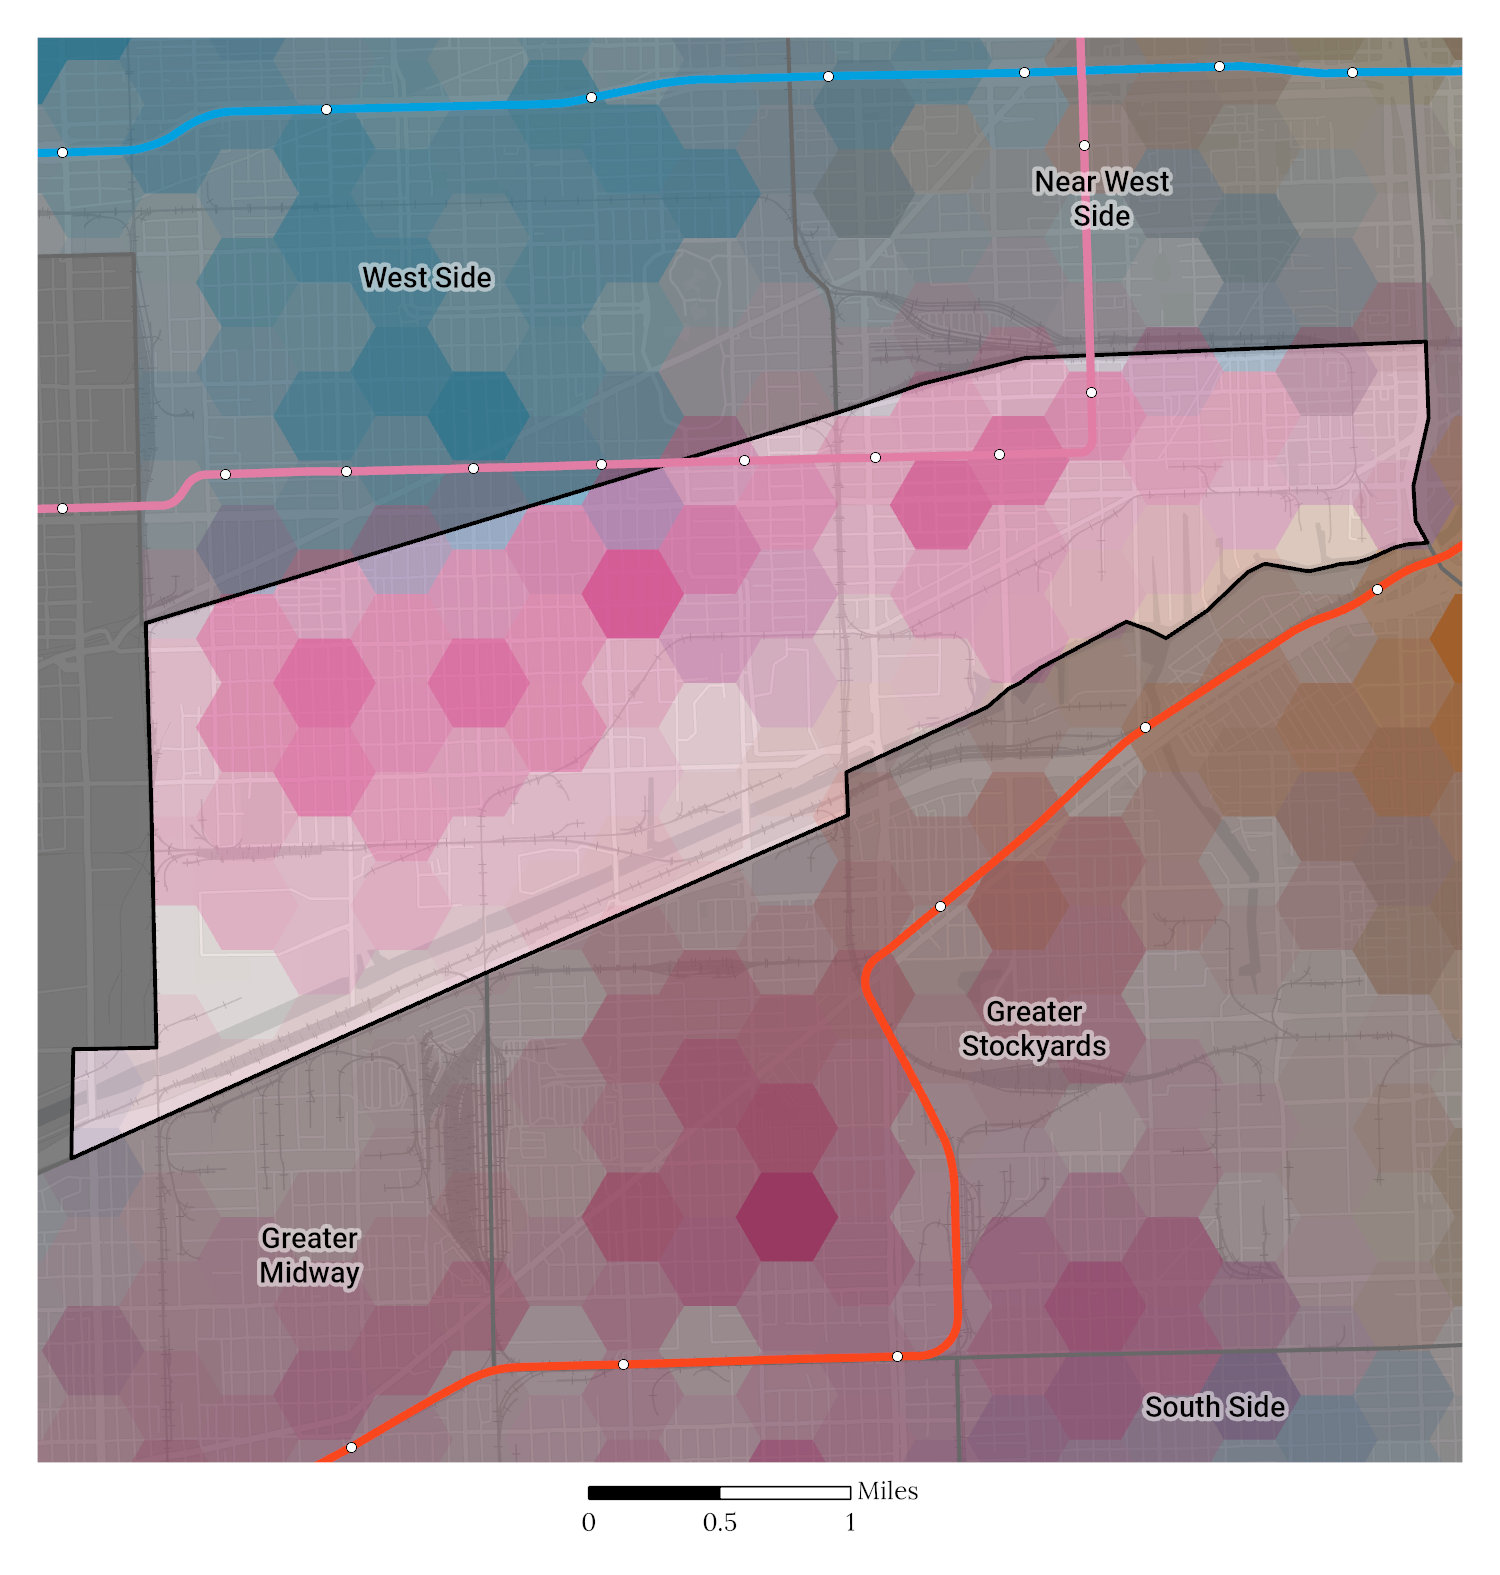 Racial and Ethnic composition map of Pilsen Little Village